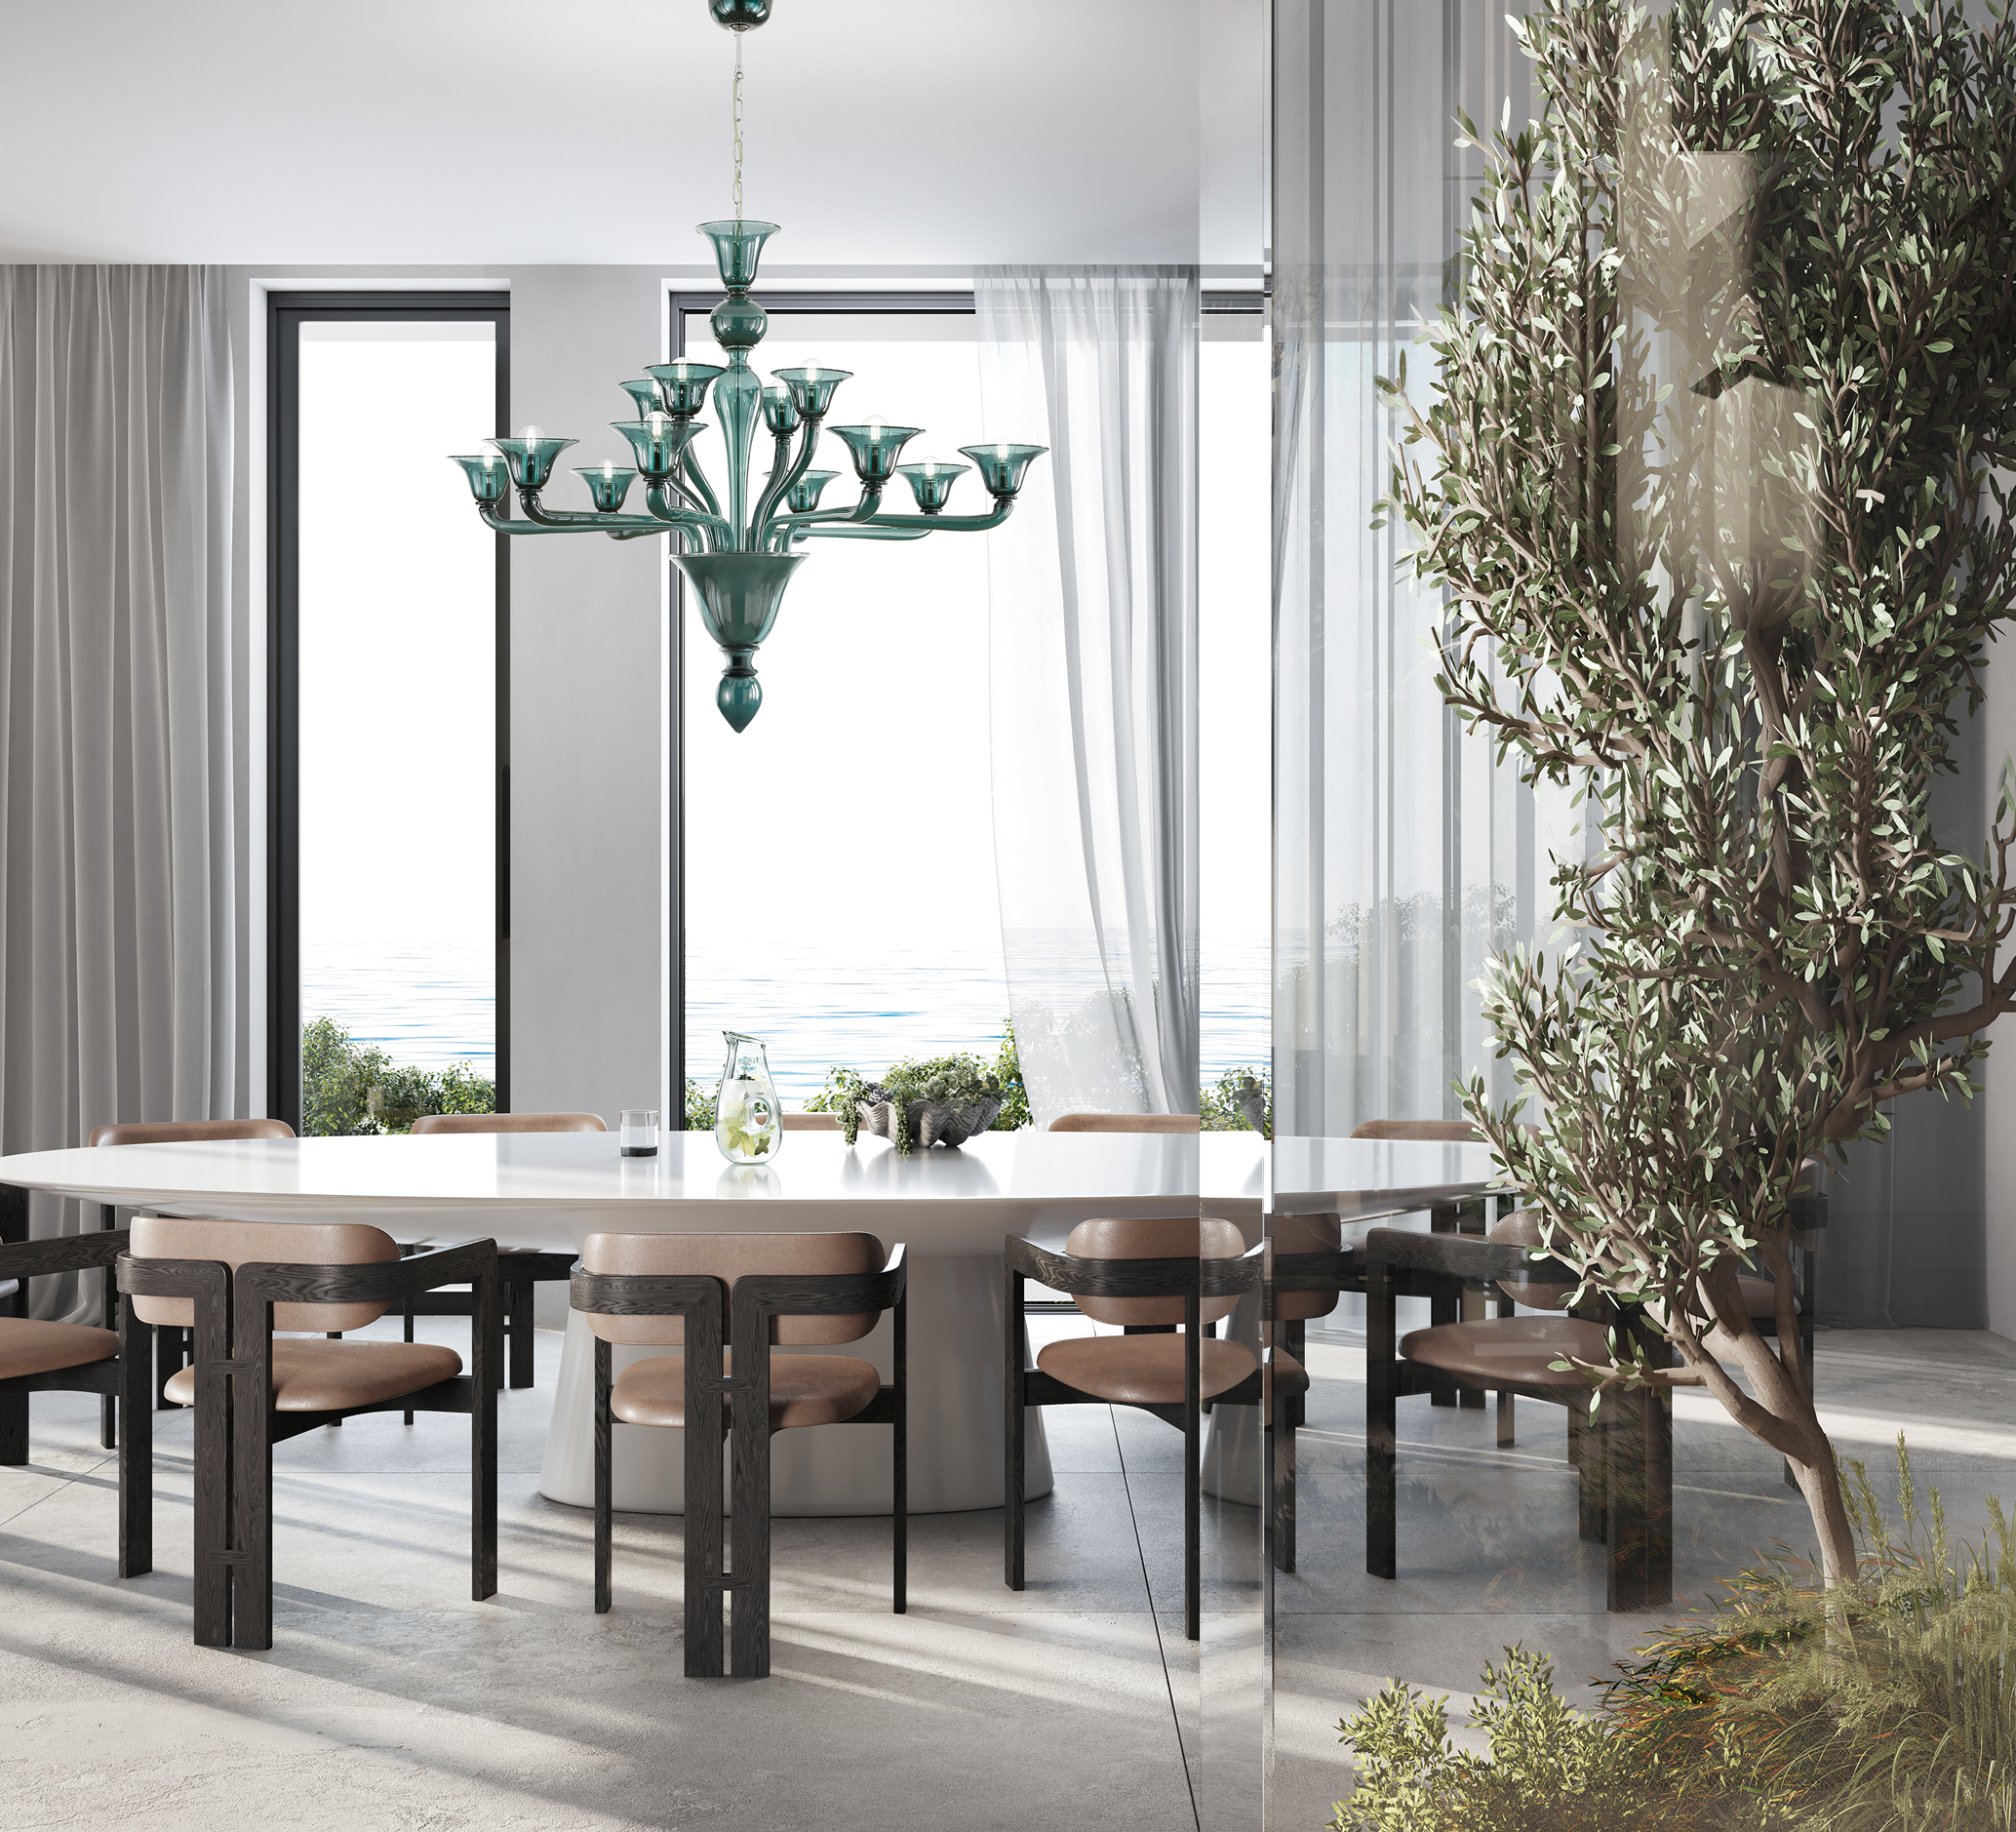 3D rendering of a dining area in modern home